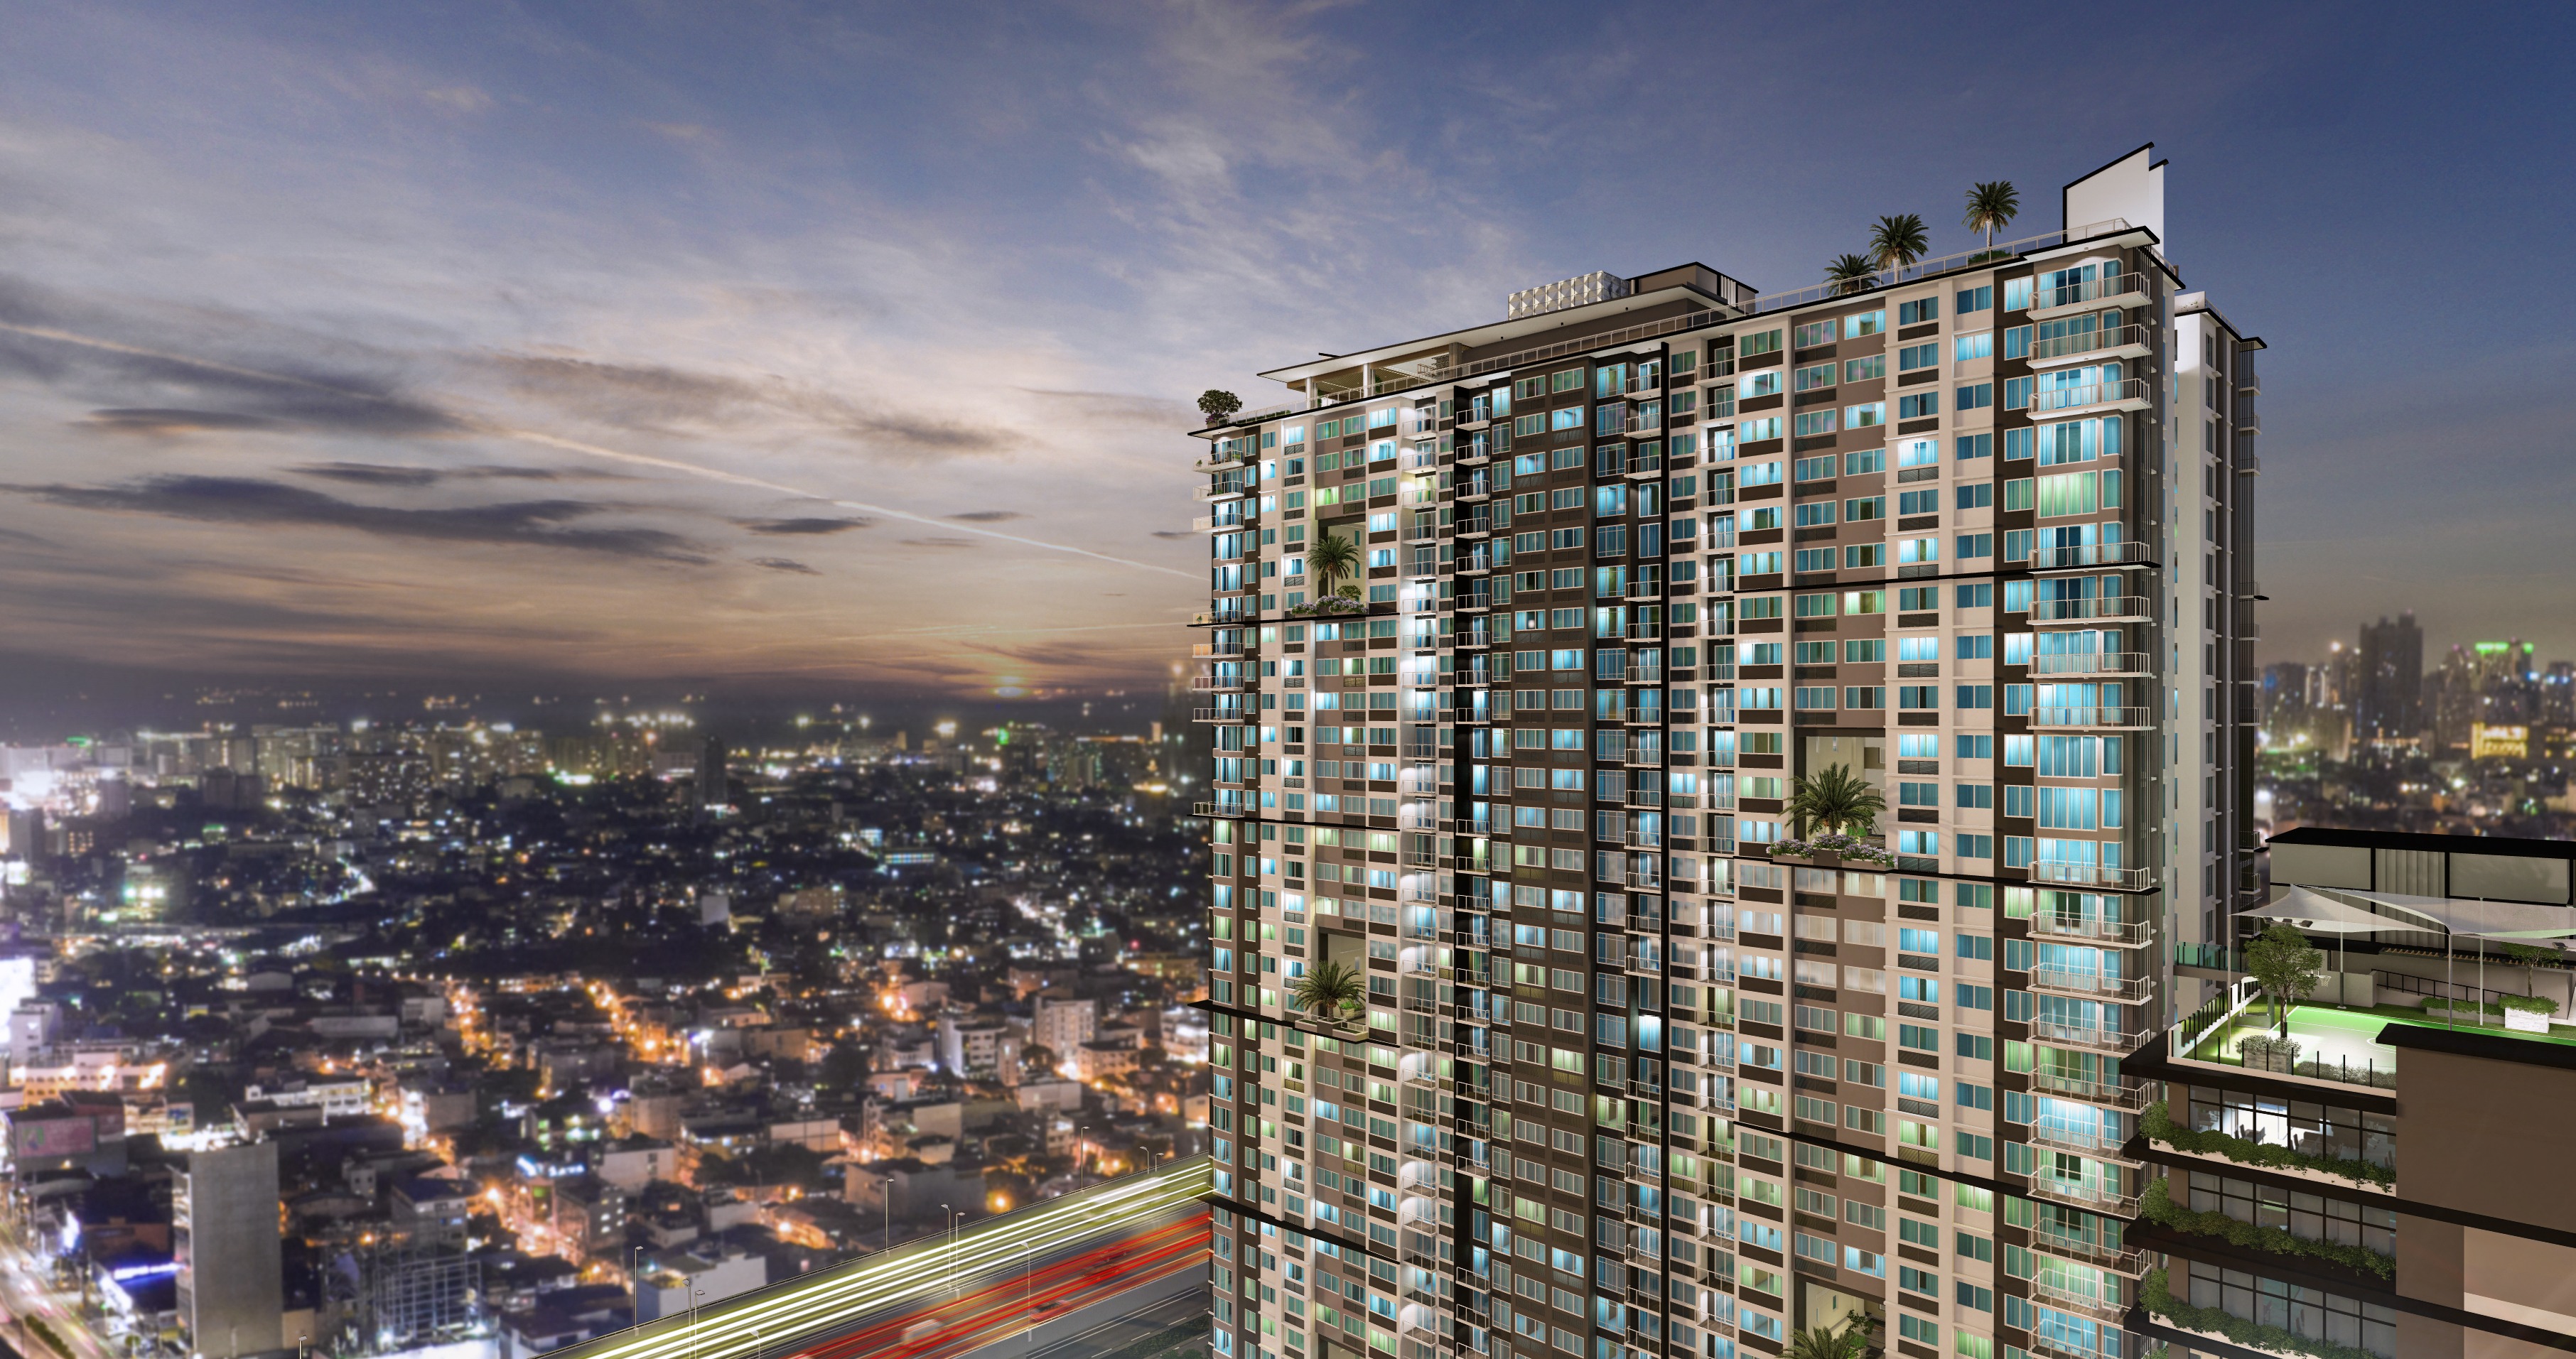 unlock-your-investment-goals-should-you-buy-a-pre-selling-upscale-condo-unit-in-makati-1686043571071